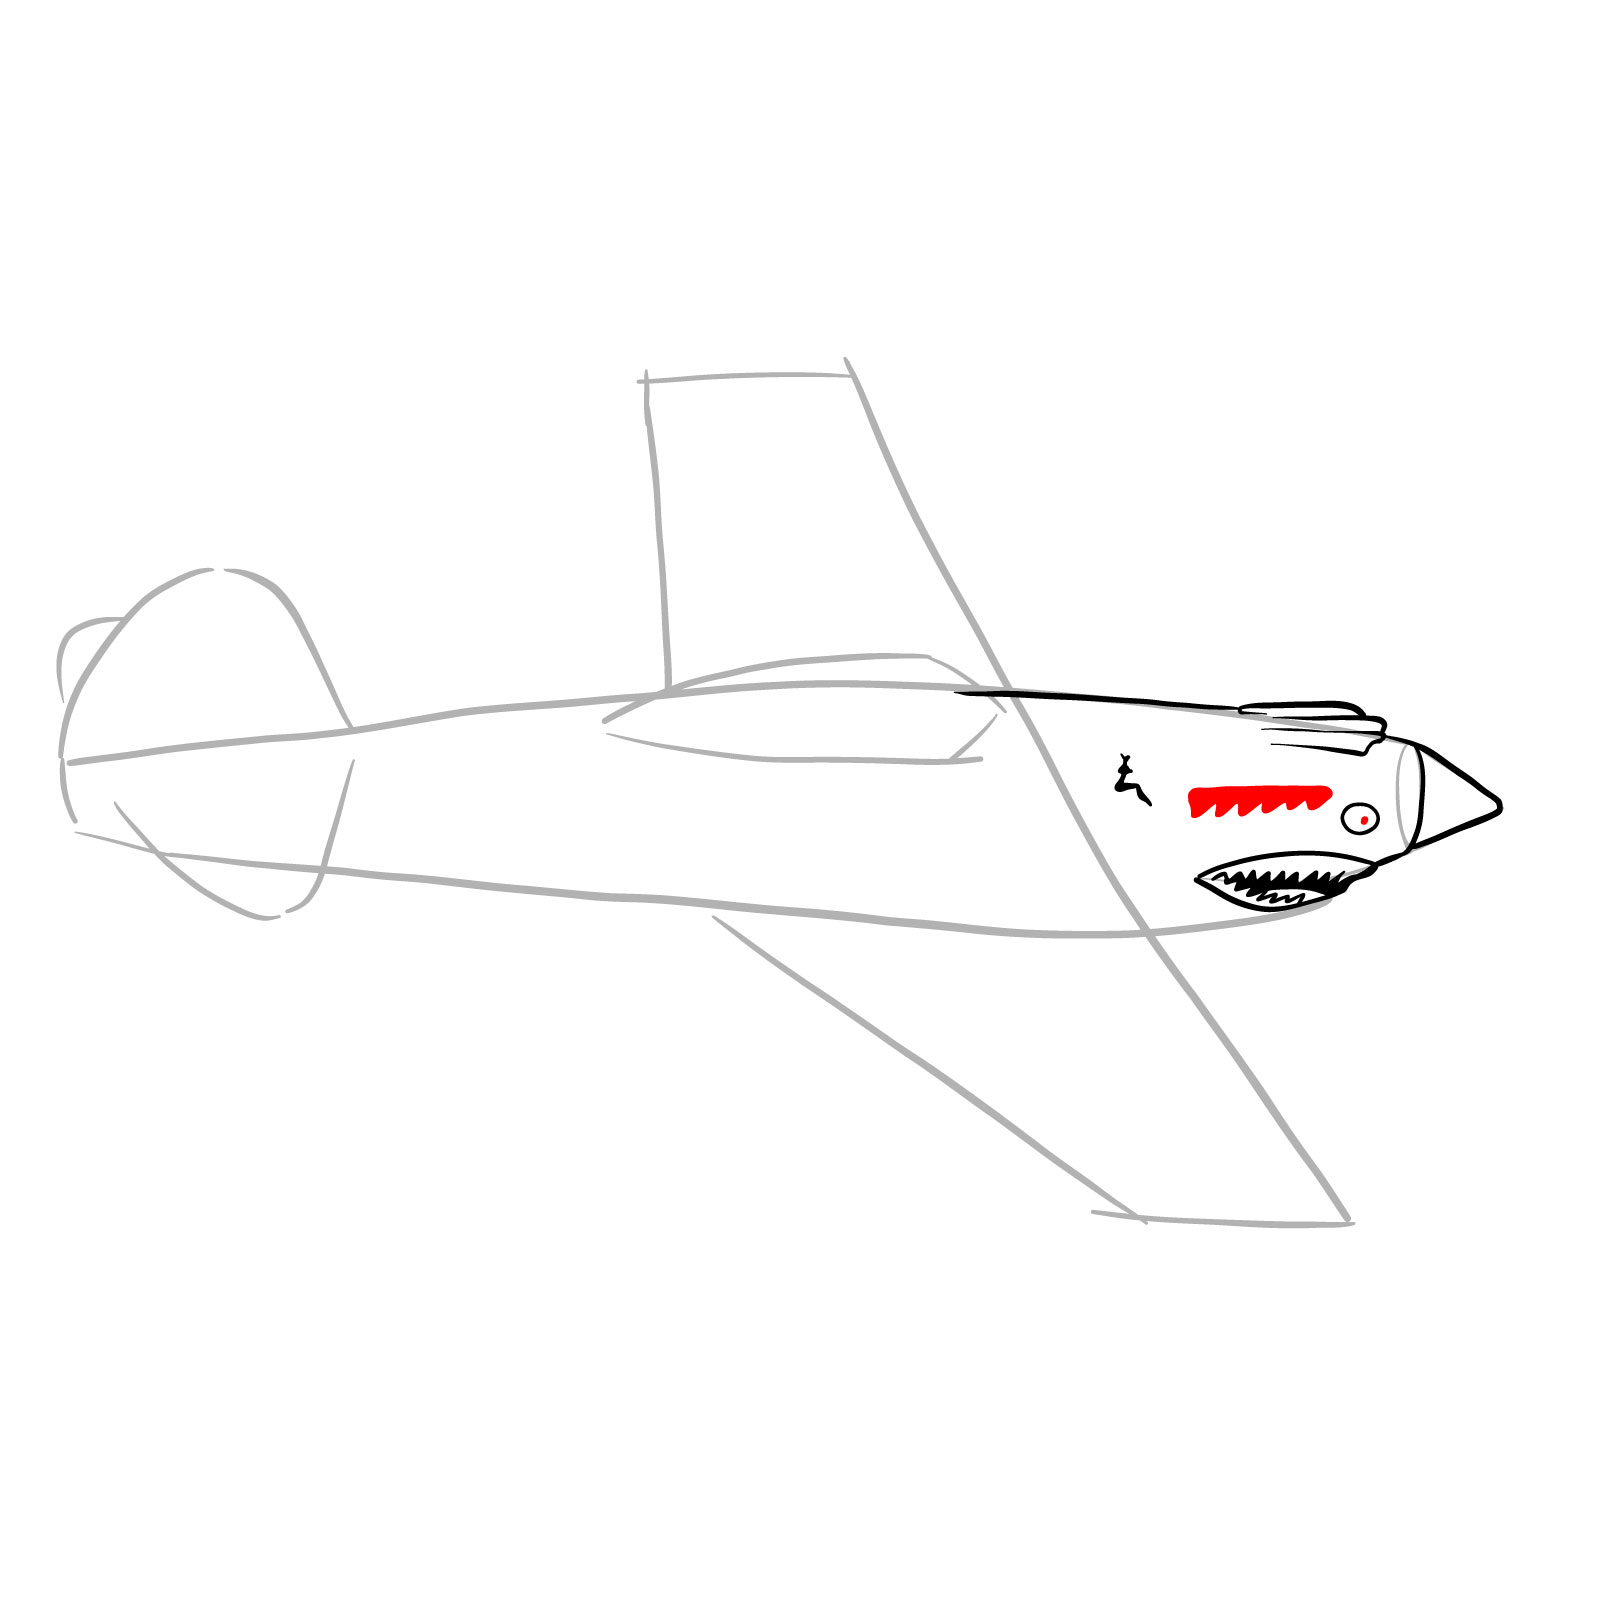 How to draw a P-40 Flying Tiger - step 10